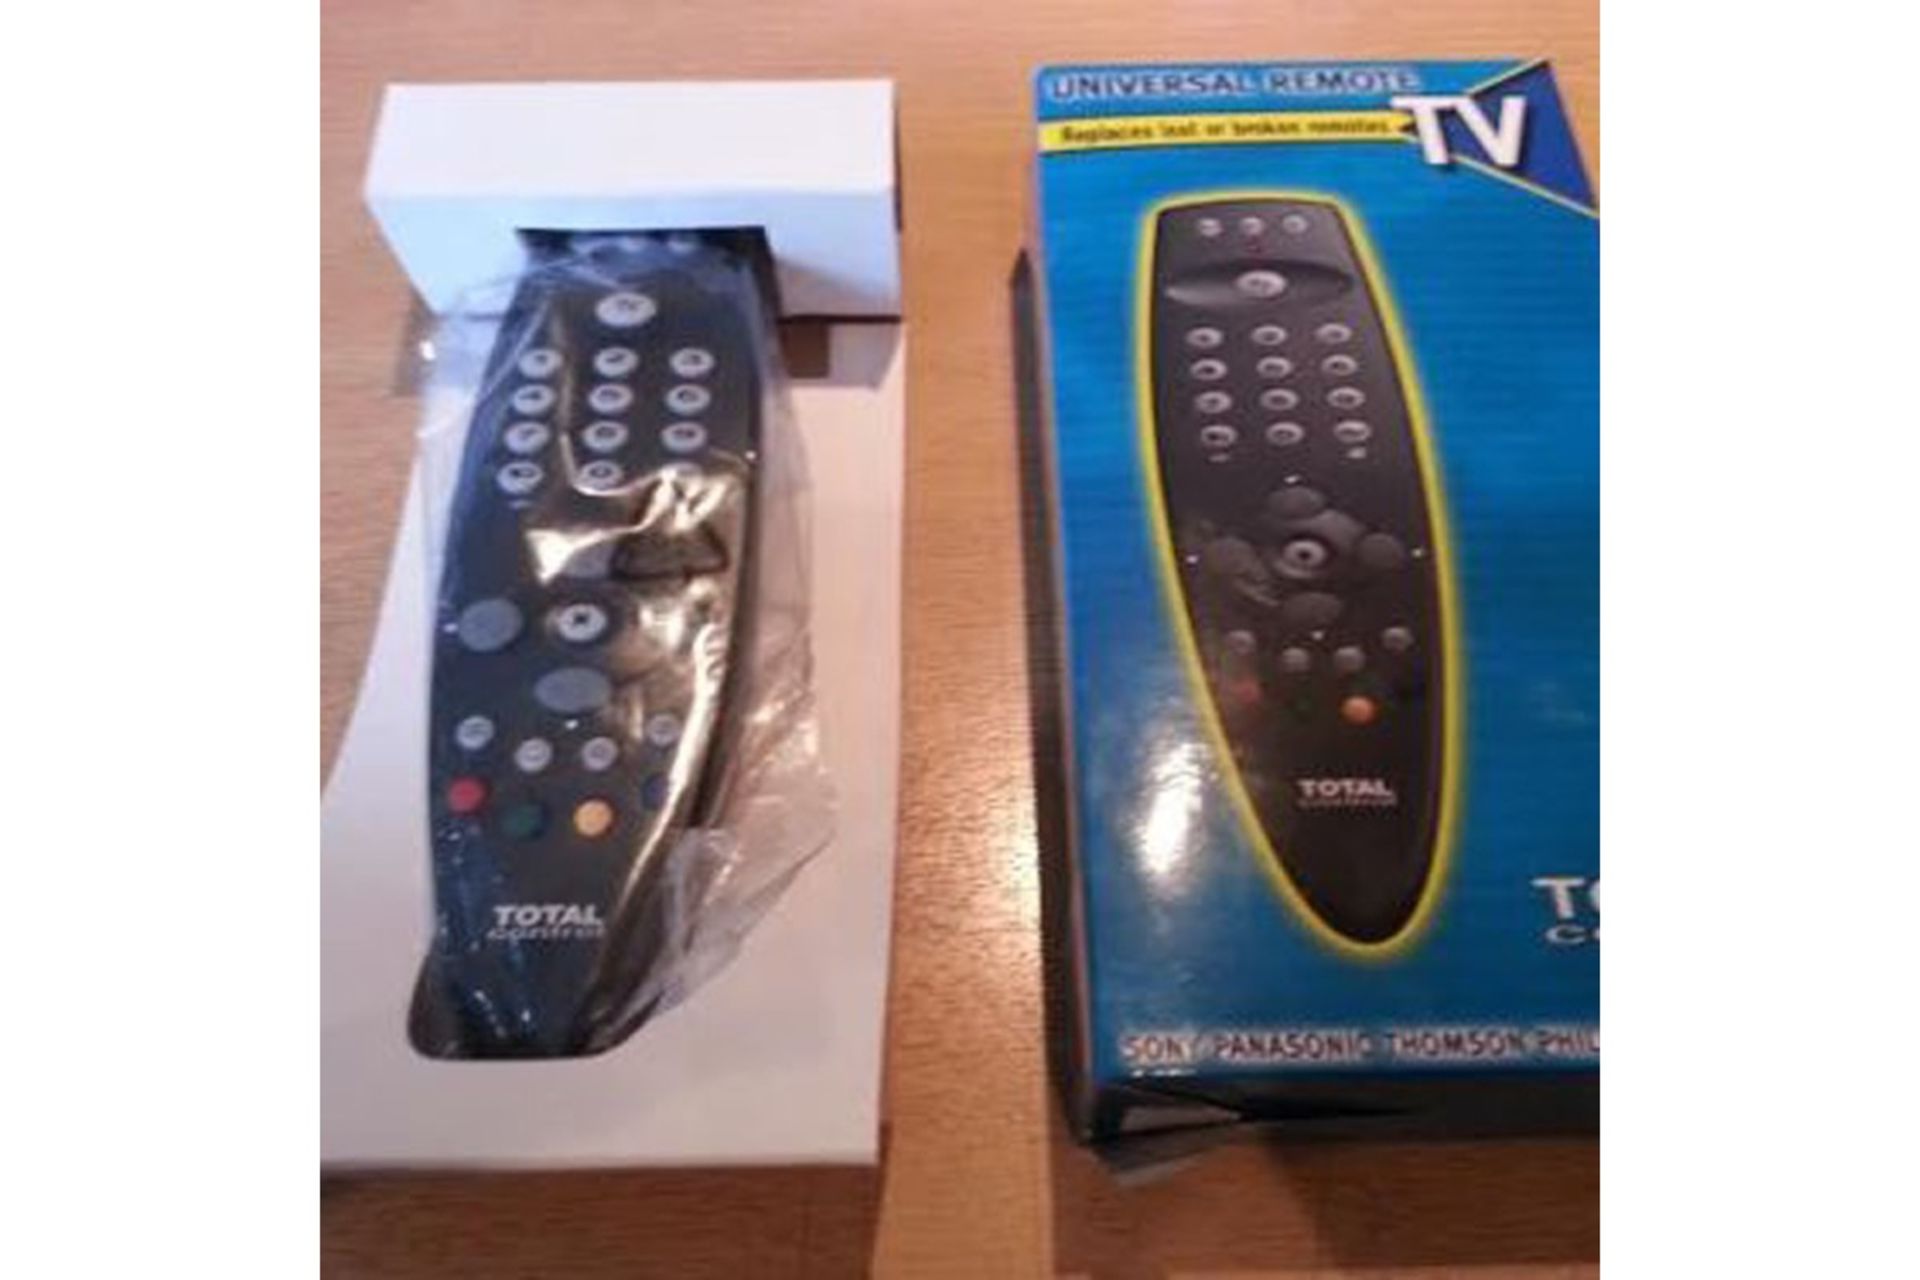 V Brand New Universal Remote Control/ 2xAA Battery Included - Preprogrammed To Control Most Brands